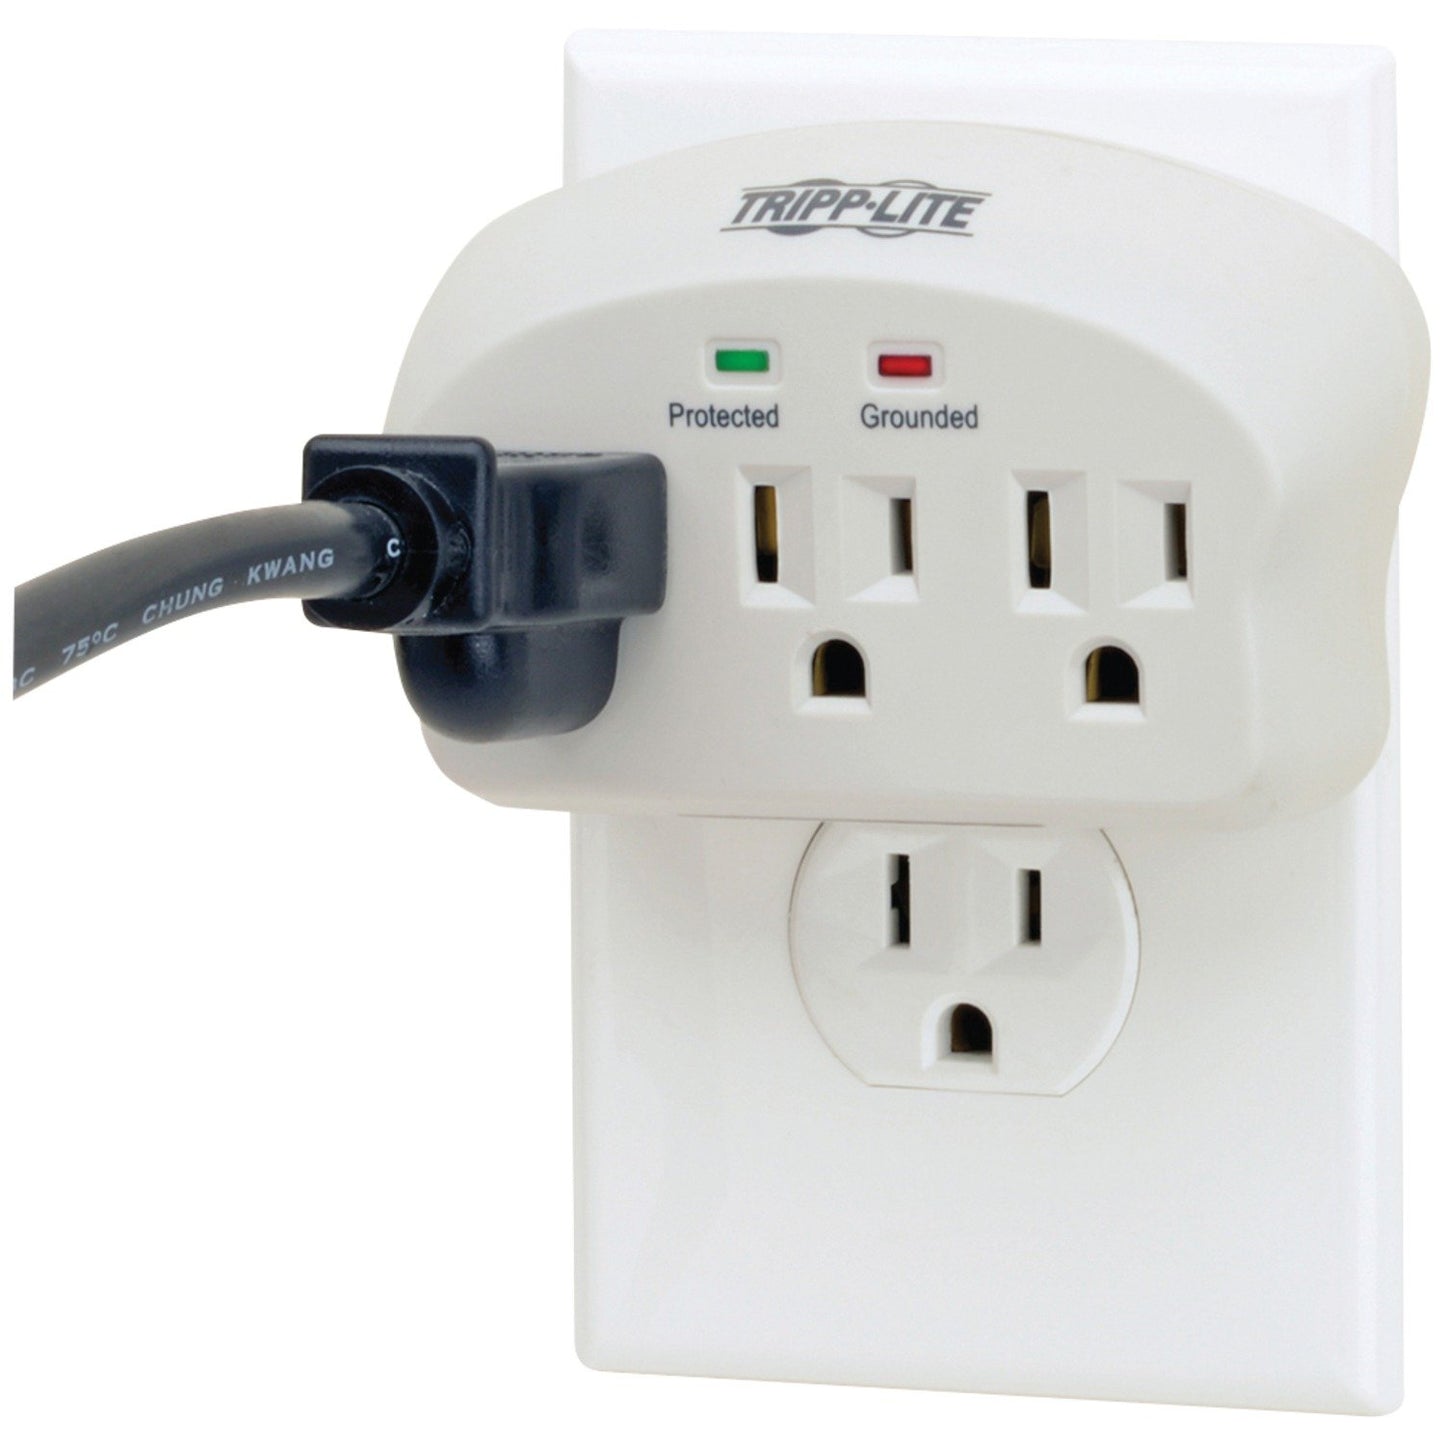 TRIPP LITE SK3-0 3 Out Direct Plug Surge Protector